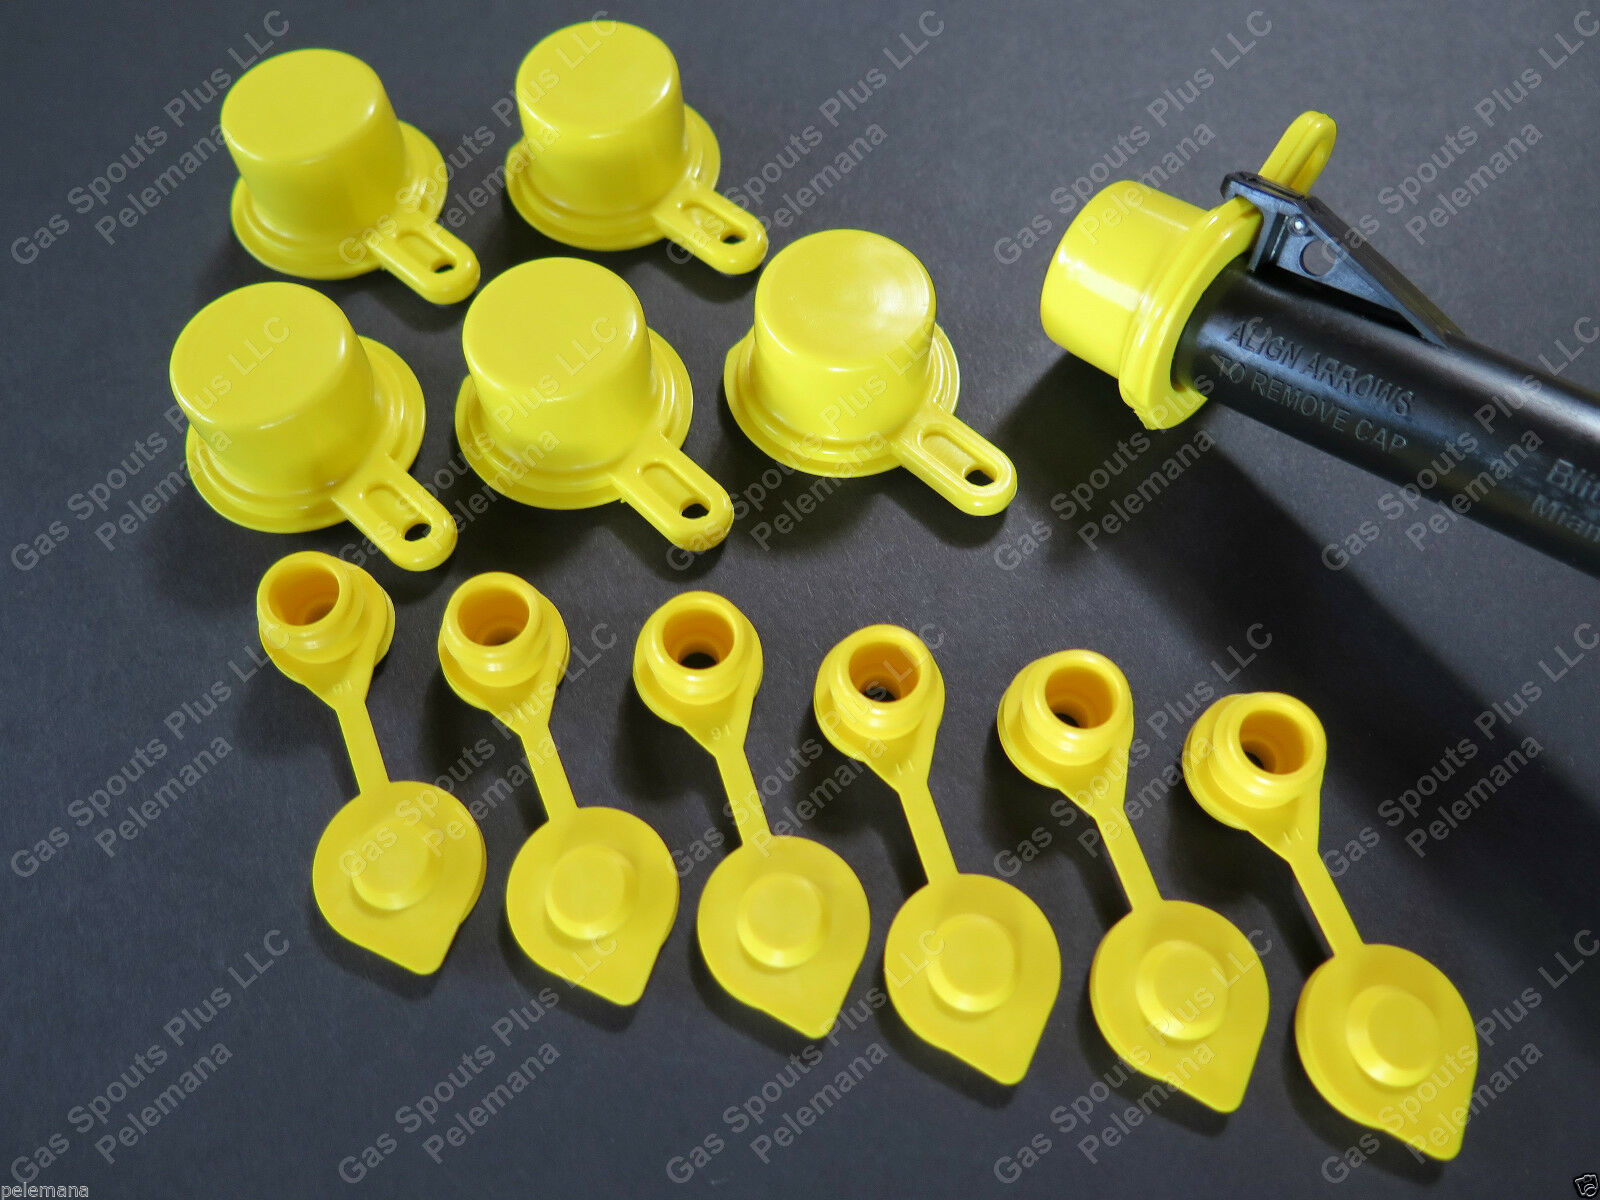 6 BLITZ SPOUT CAPS +6 YELLOW GAS CAN VENTS Ships Free "Fix your Blitz Gas Can" - $20.52